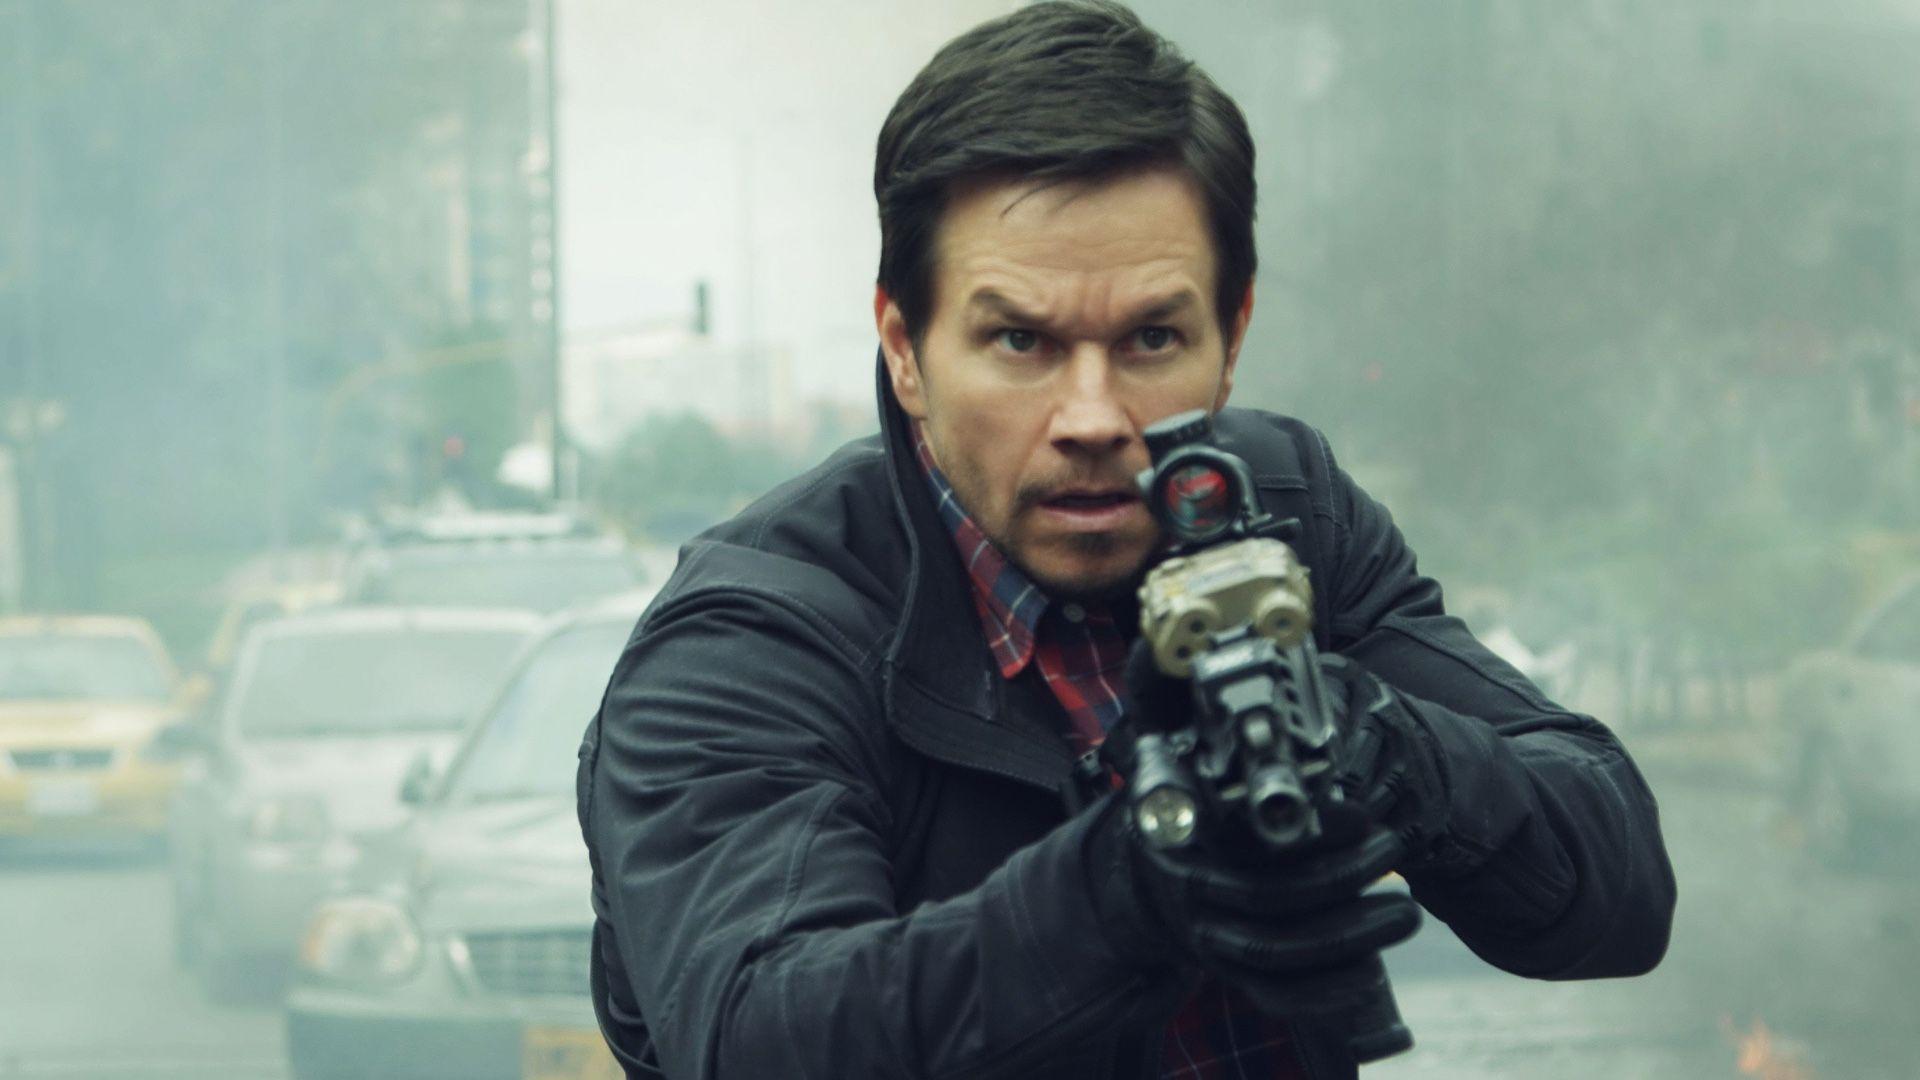 Mark Wahlberg And Lauren Cohan Are Badass Special Ops Agents In MILE